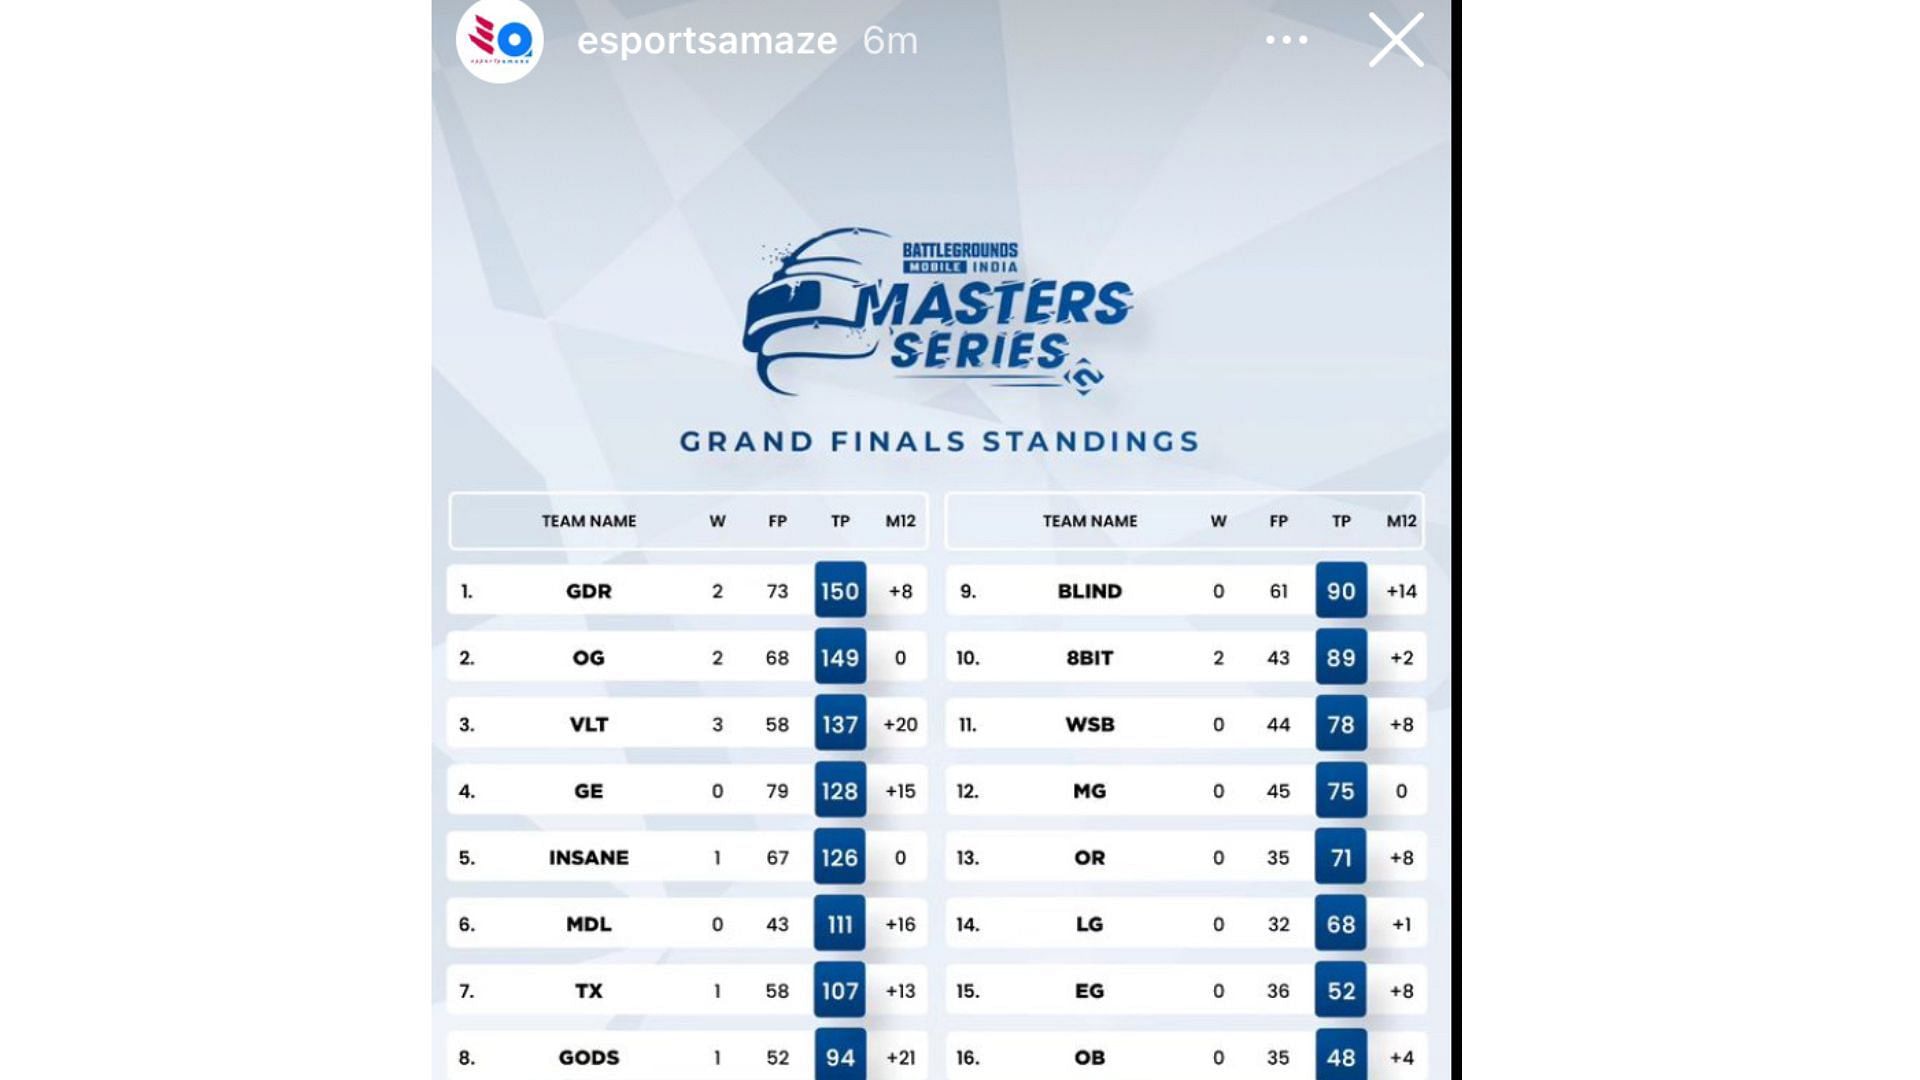 Gladiators Esports Wins BGMI Masters Series Season 2 (BGMS 2023) with  one-point Lead and Bags Rs 1 Crore Prize Money - MySmartPrice